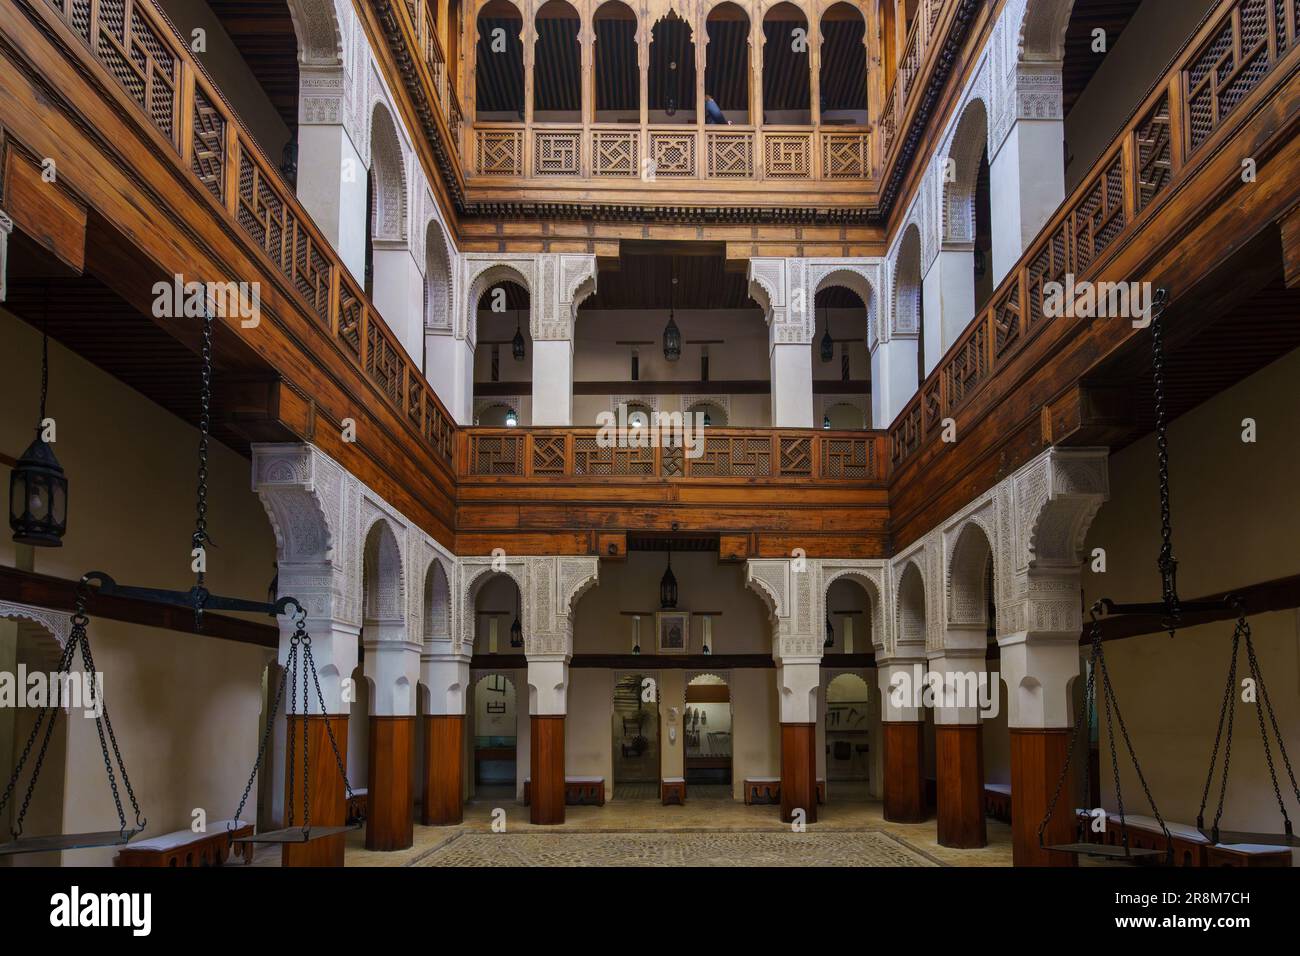 Morocco. Fez. Interior of the historic Nejjarine Museum of Wooden Arts and Crafts Stock Photo